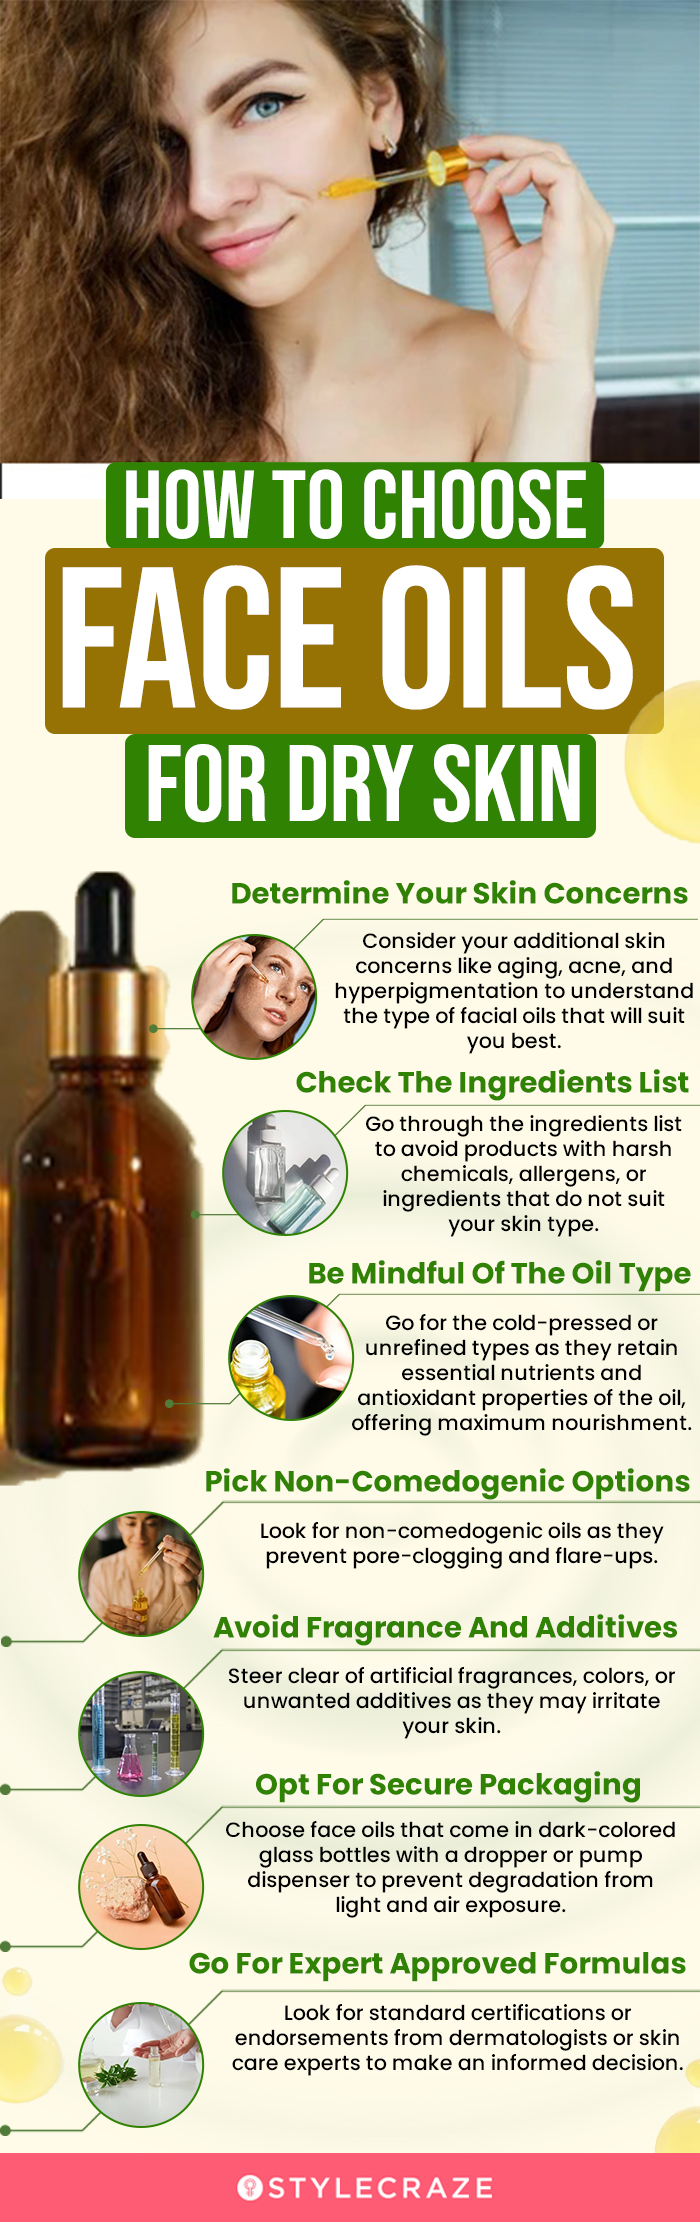 How To Choose Face Oils For Dry Skin (infographic)